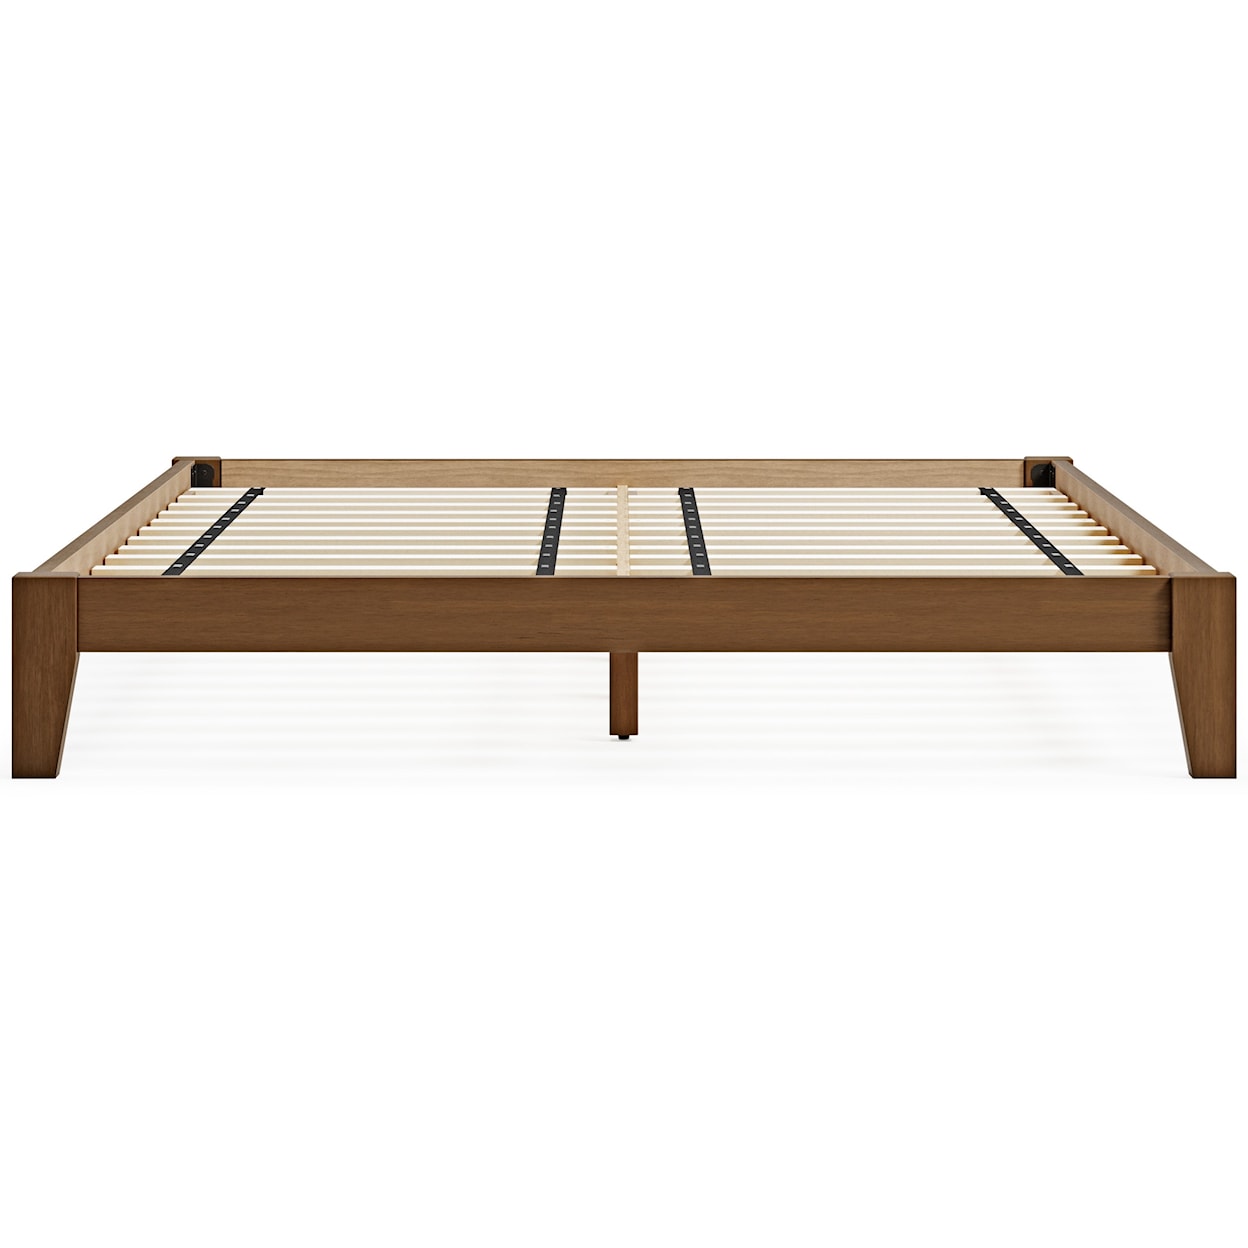 Signature Design by Ashley Tannally Queen Platform Bed